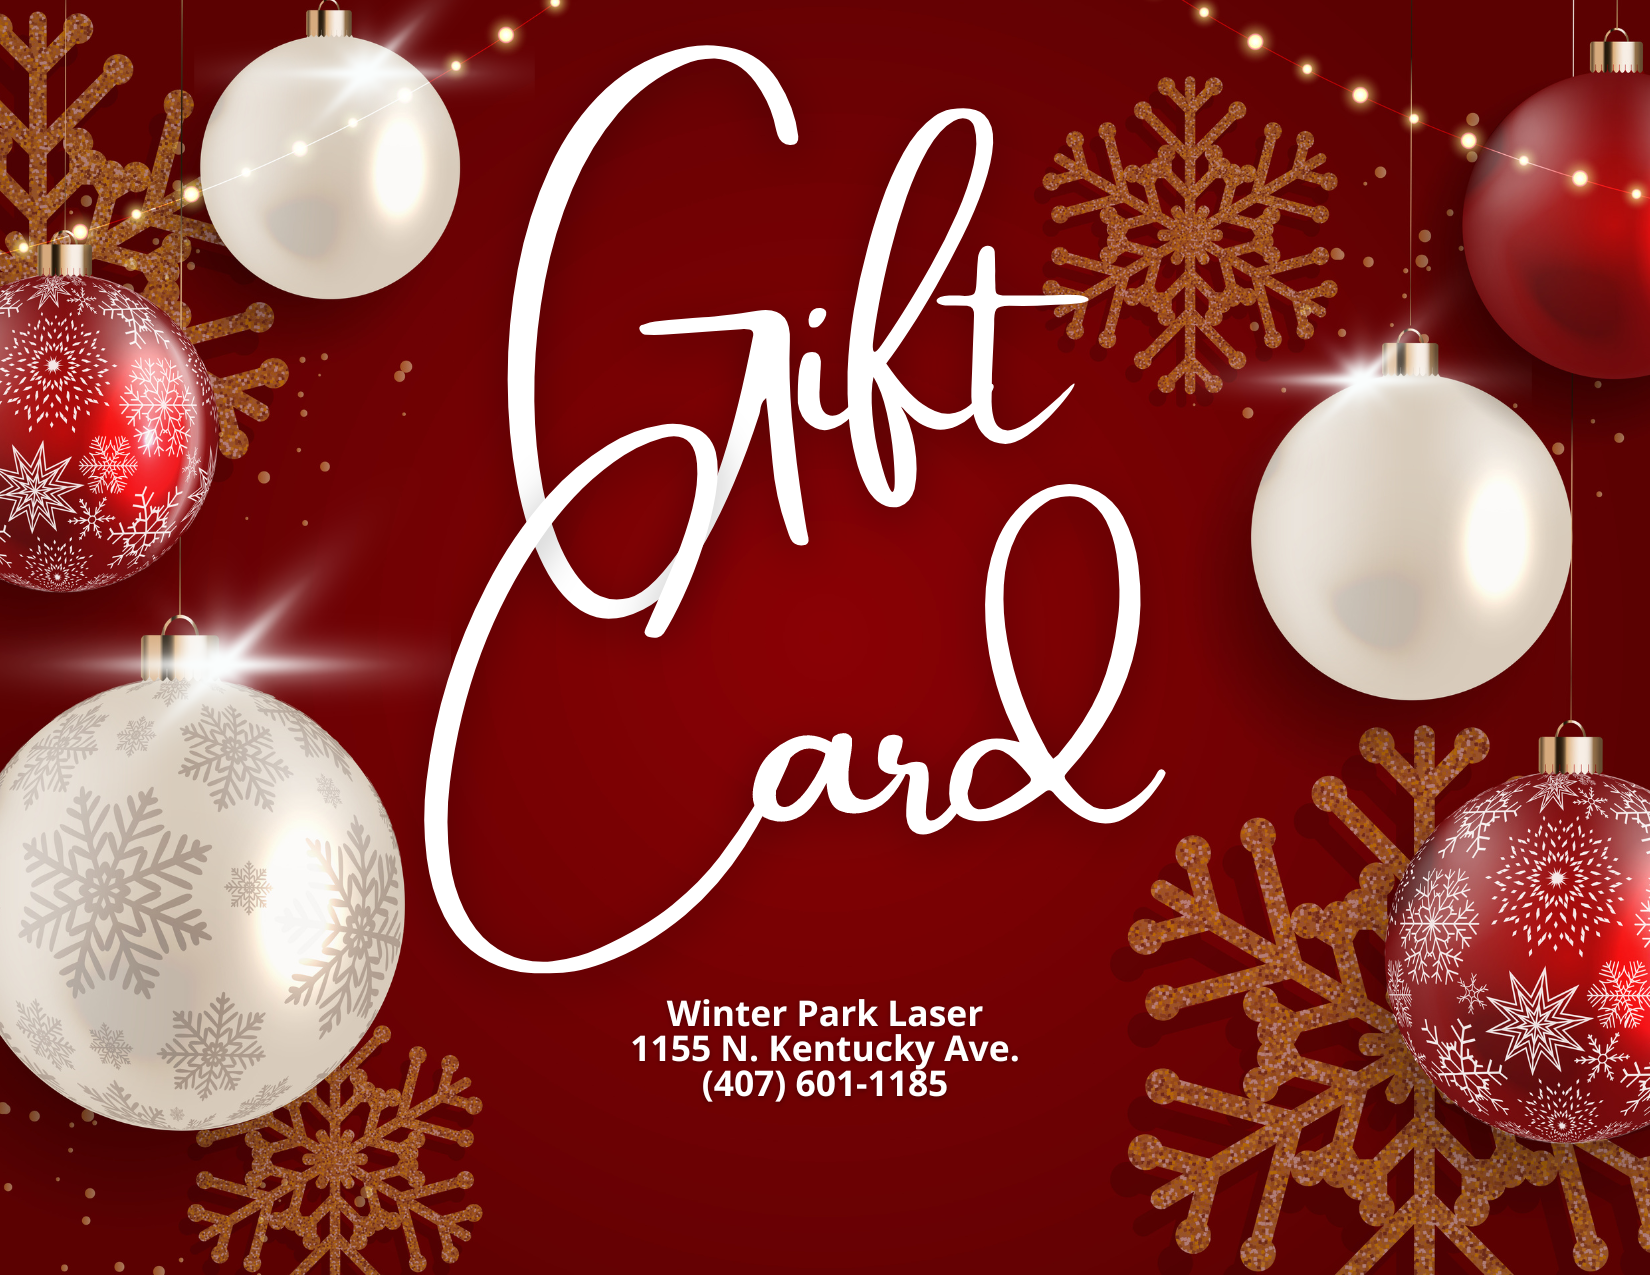 Post by December 1st Christmas GiftCard